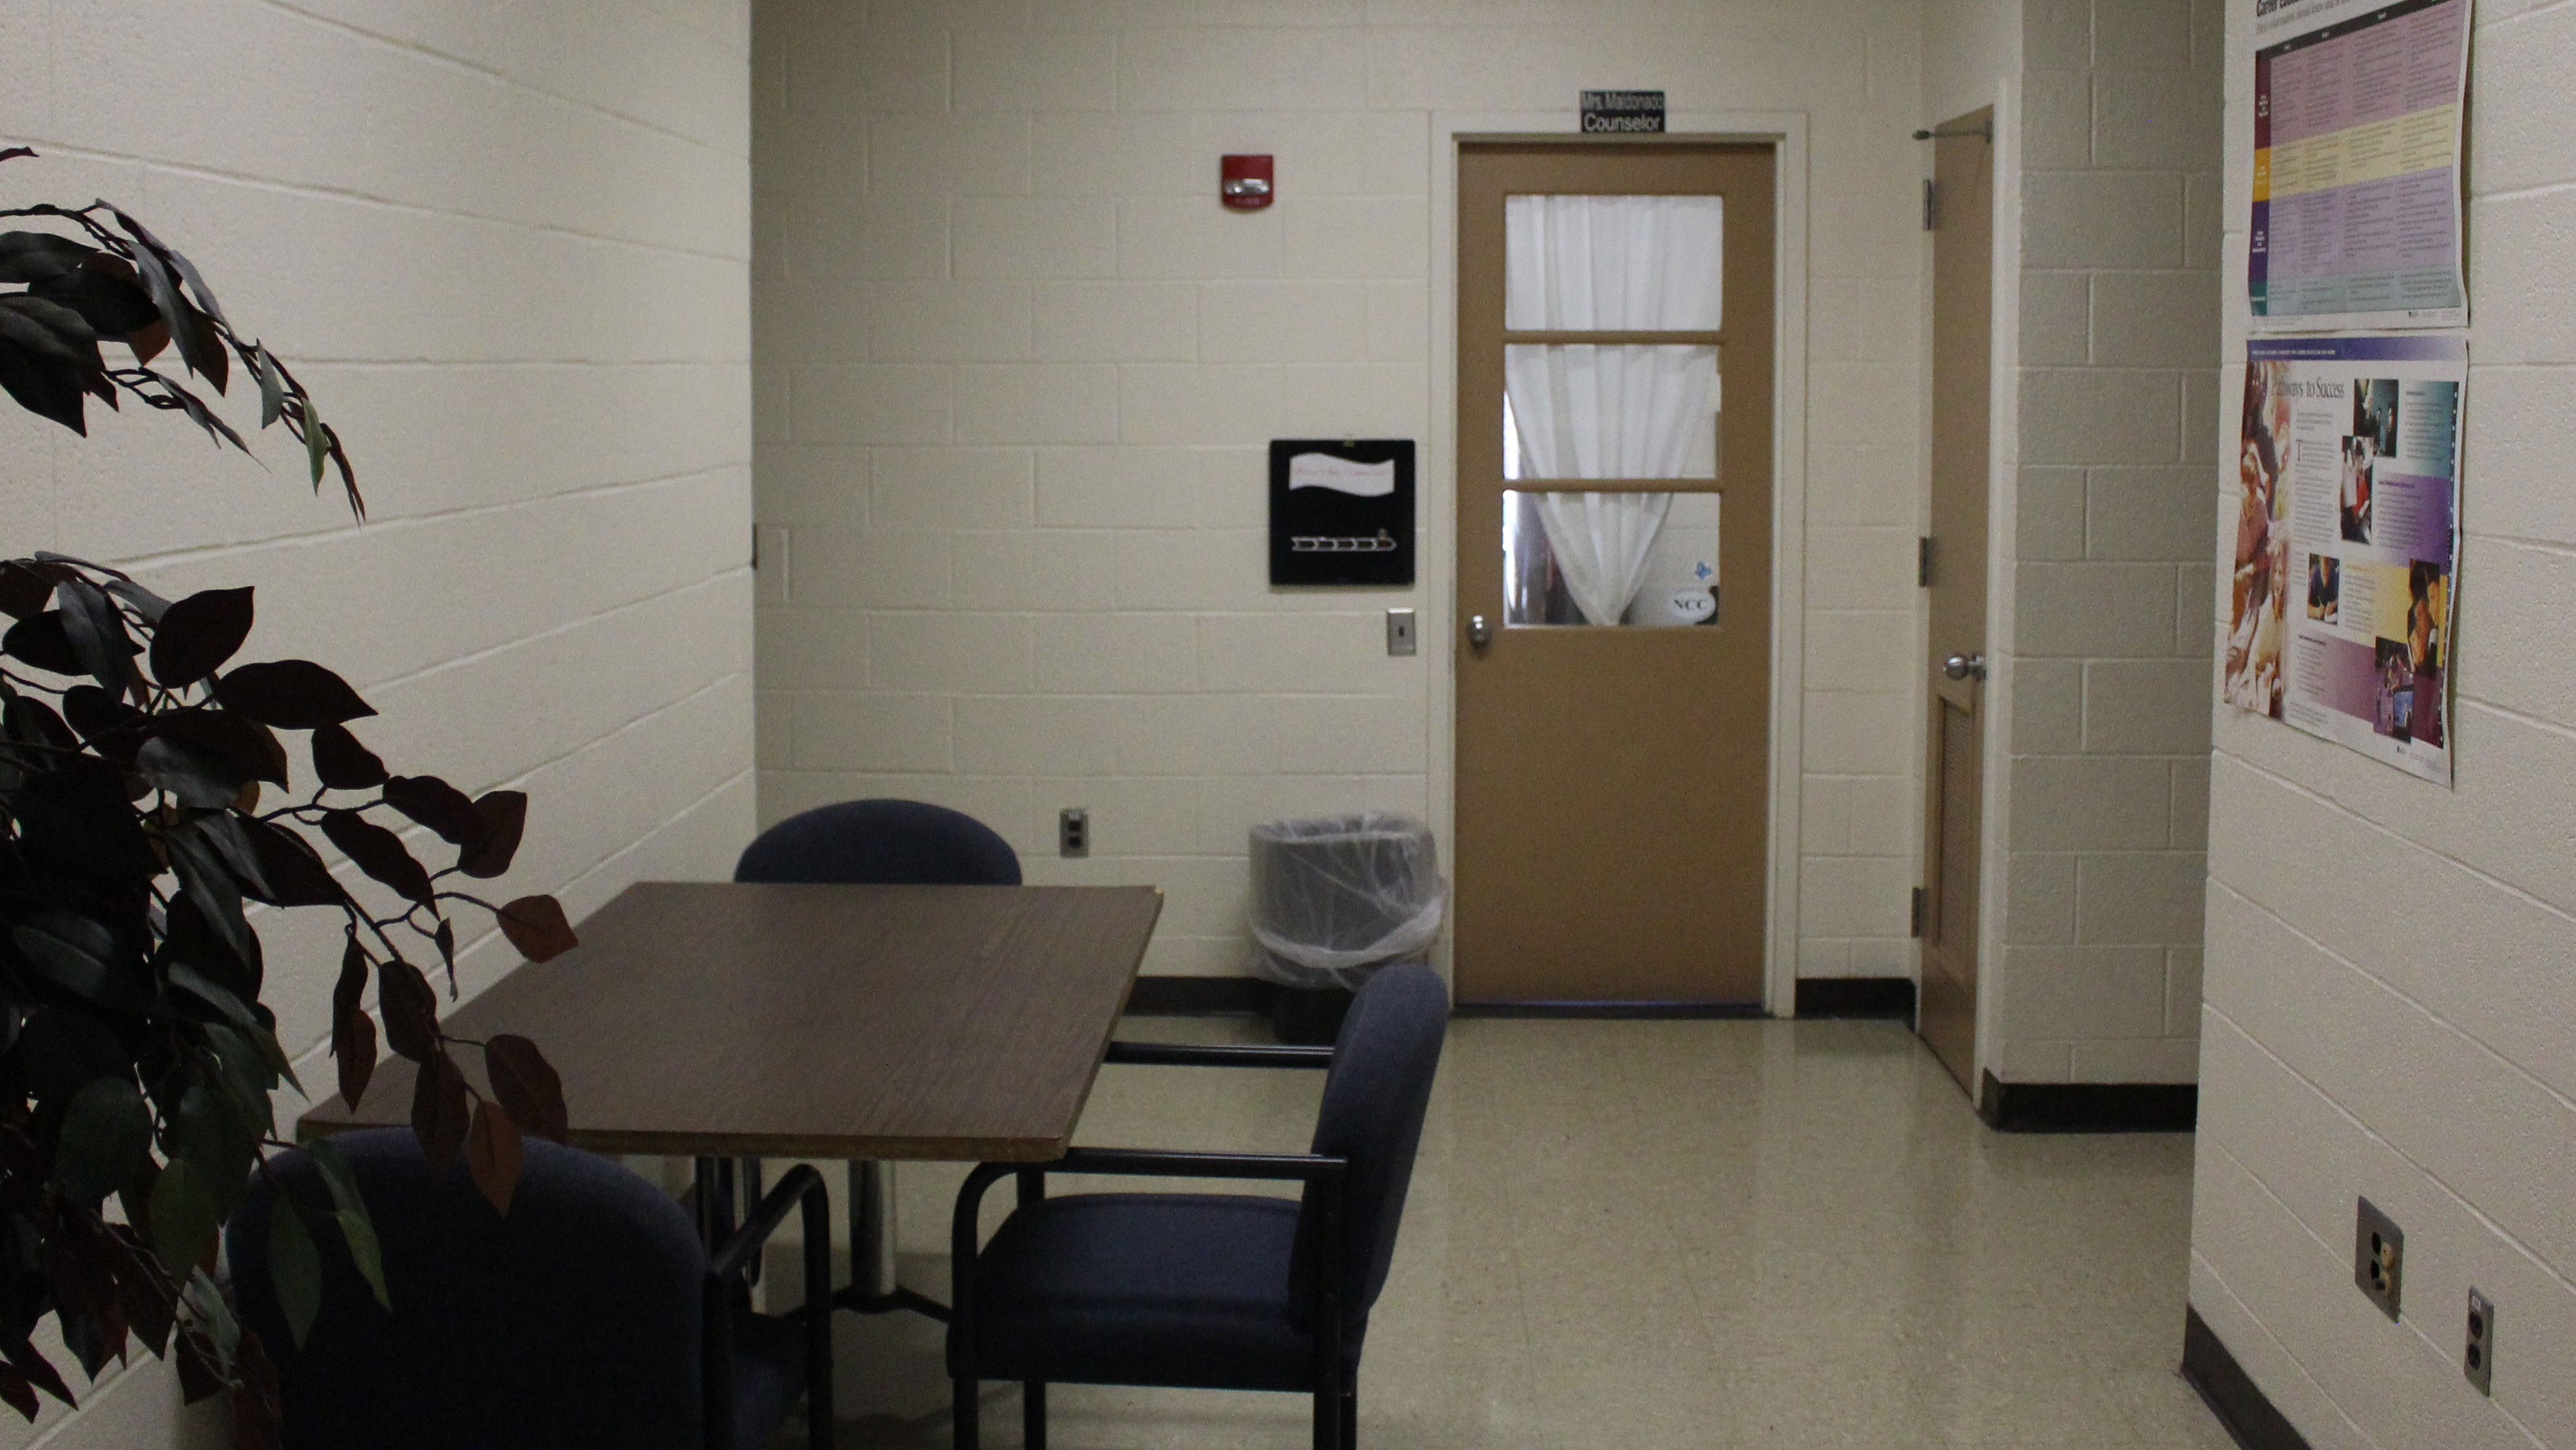 upper dauphin area psychological services room